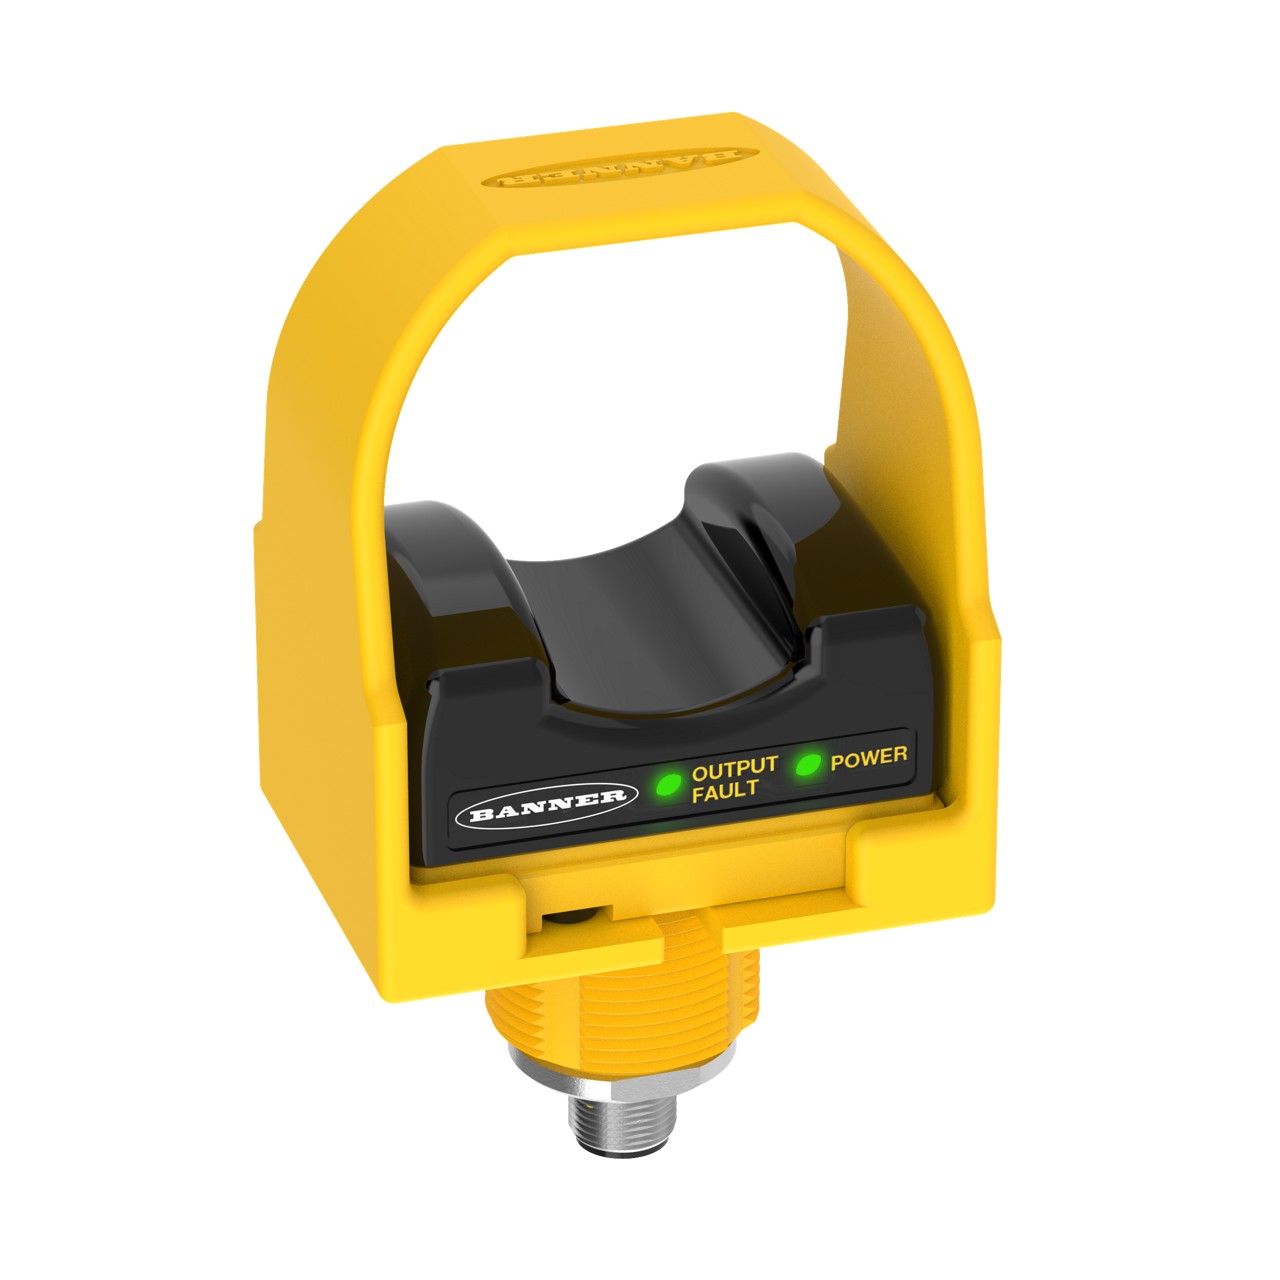 STBVR81Q6 - STB Series: Self-Checking Touch Button w/Yellow F.C.; Input: 20-30 V ac or dc; Upper Housing: Black Polyetherimide; Outputs: Two Independe